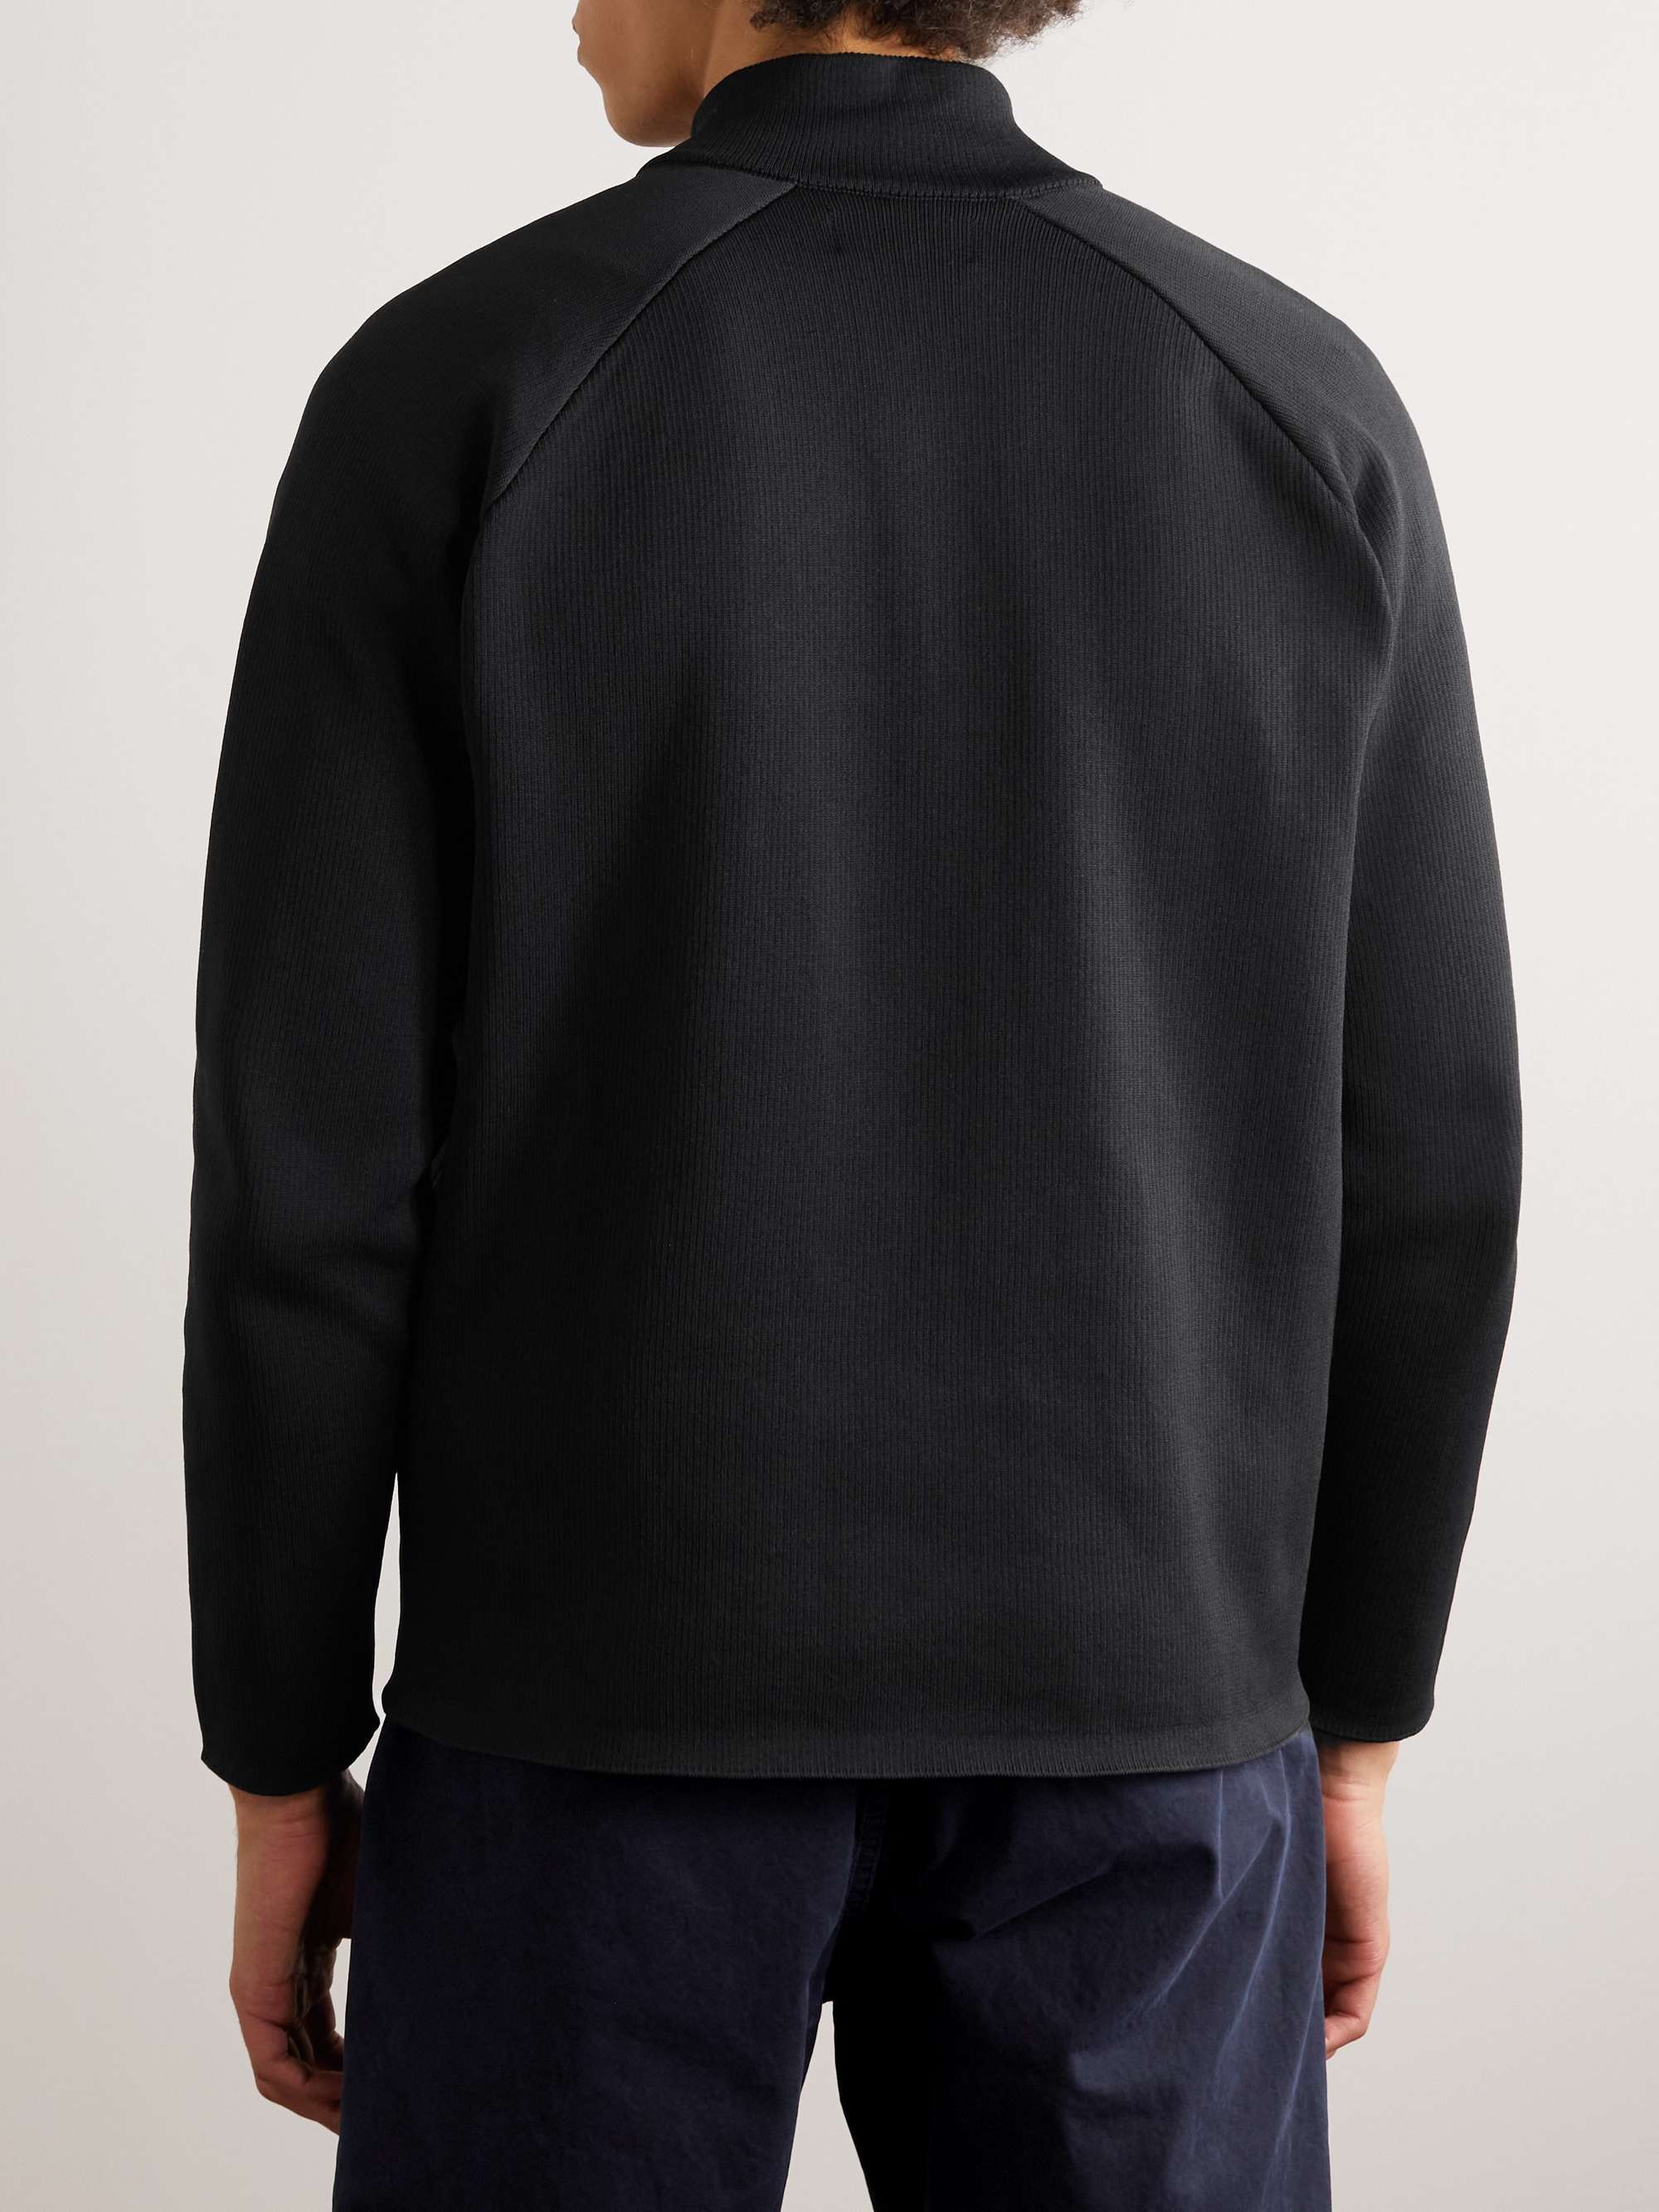 STONE ISLAND Logo-Embroidered Ribbed-Knit Zip-Up Sweater for Men | MR ...